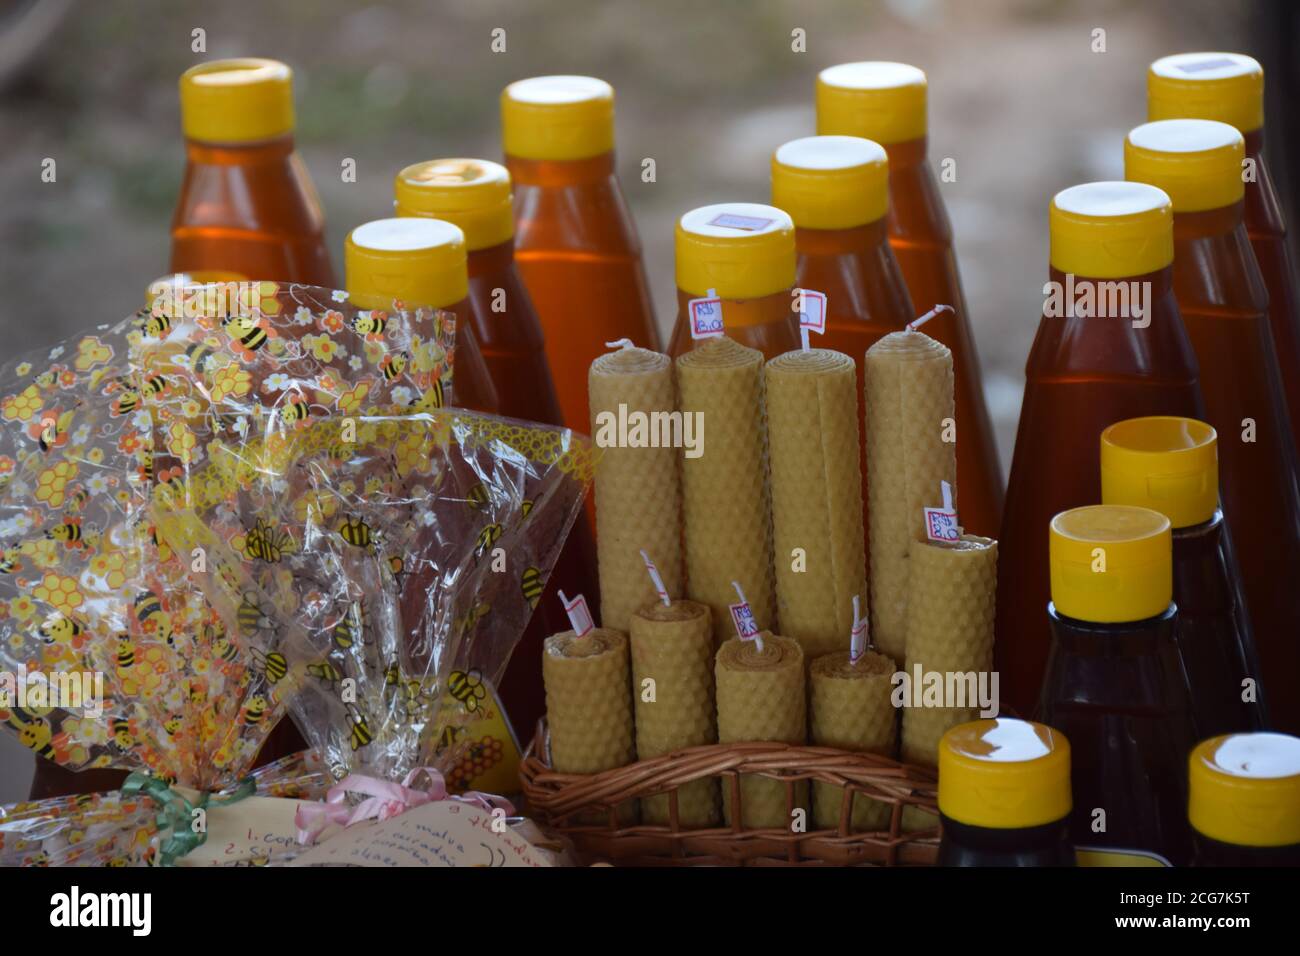 honey products bees honey bottles over table natural wax candles Stock Photo